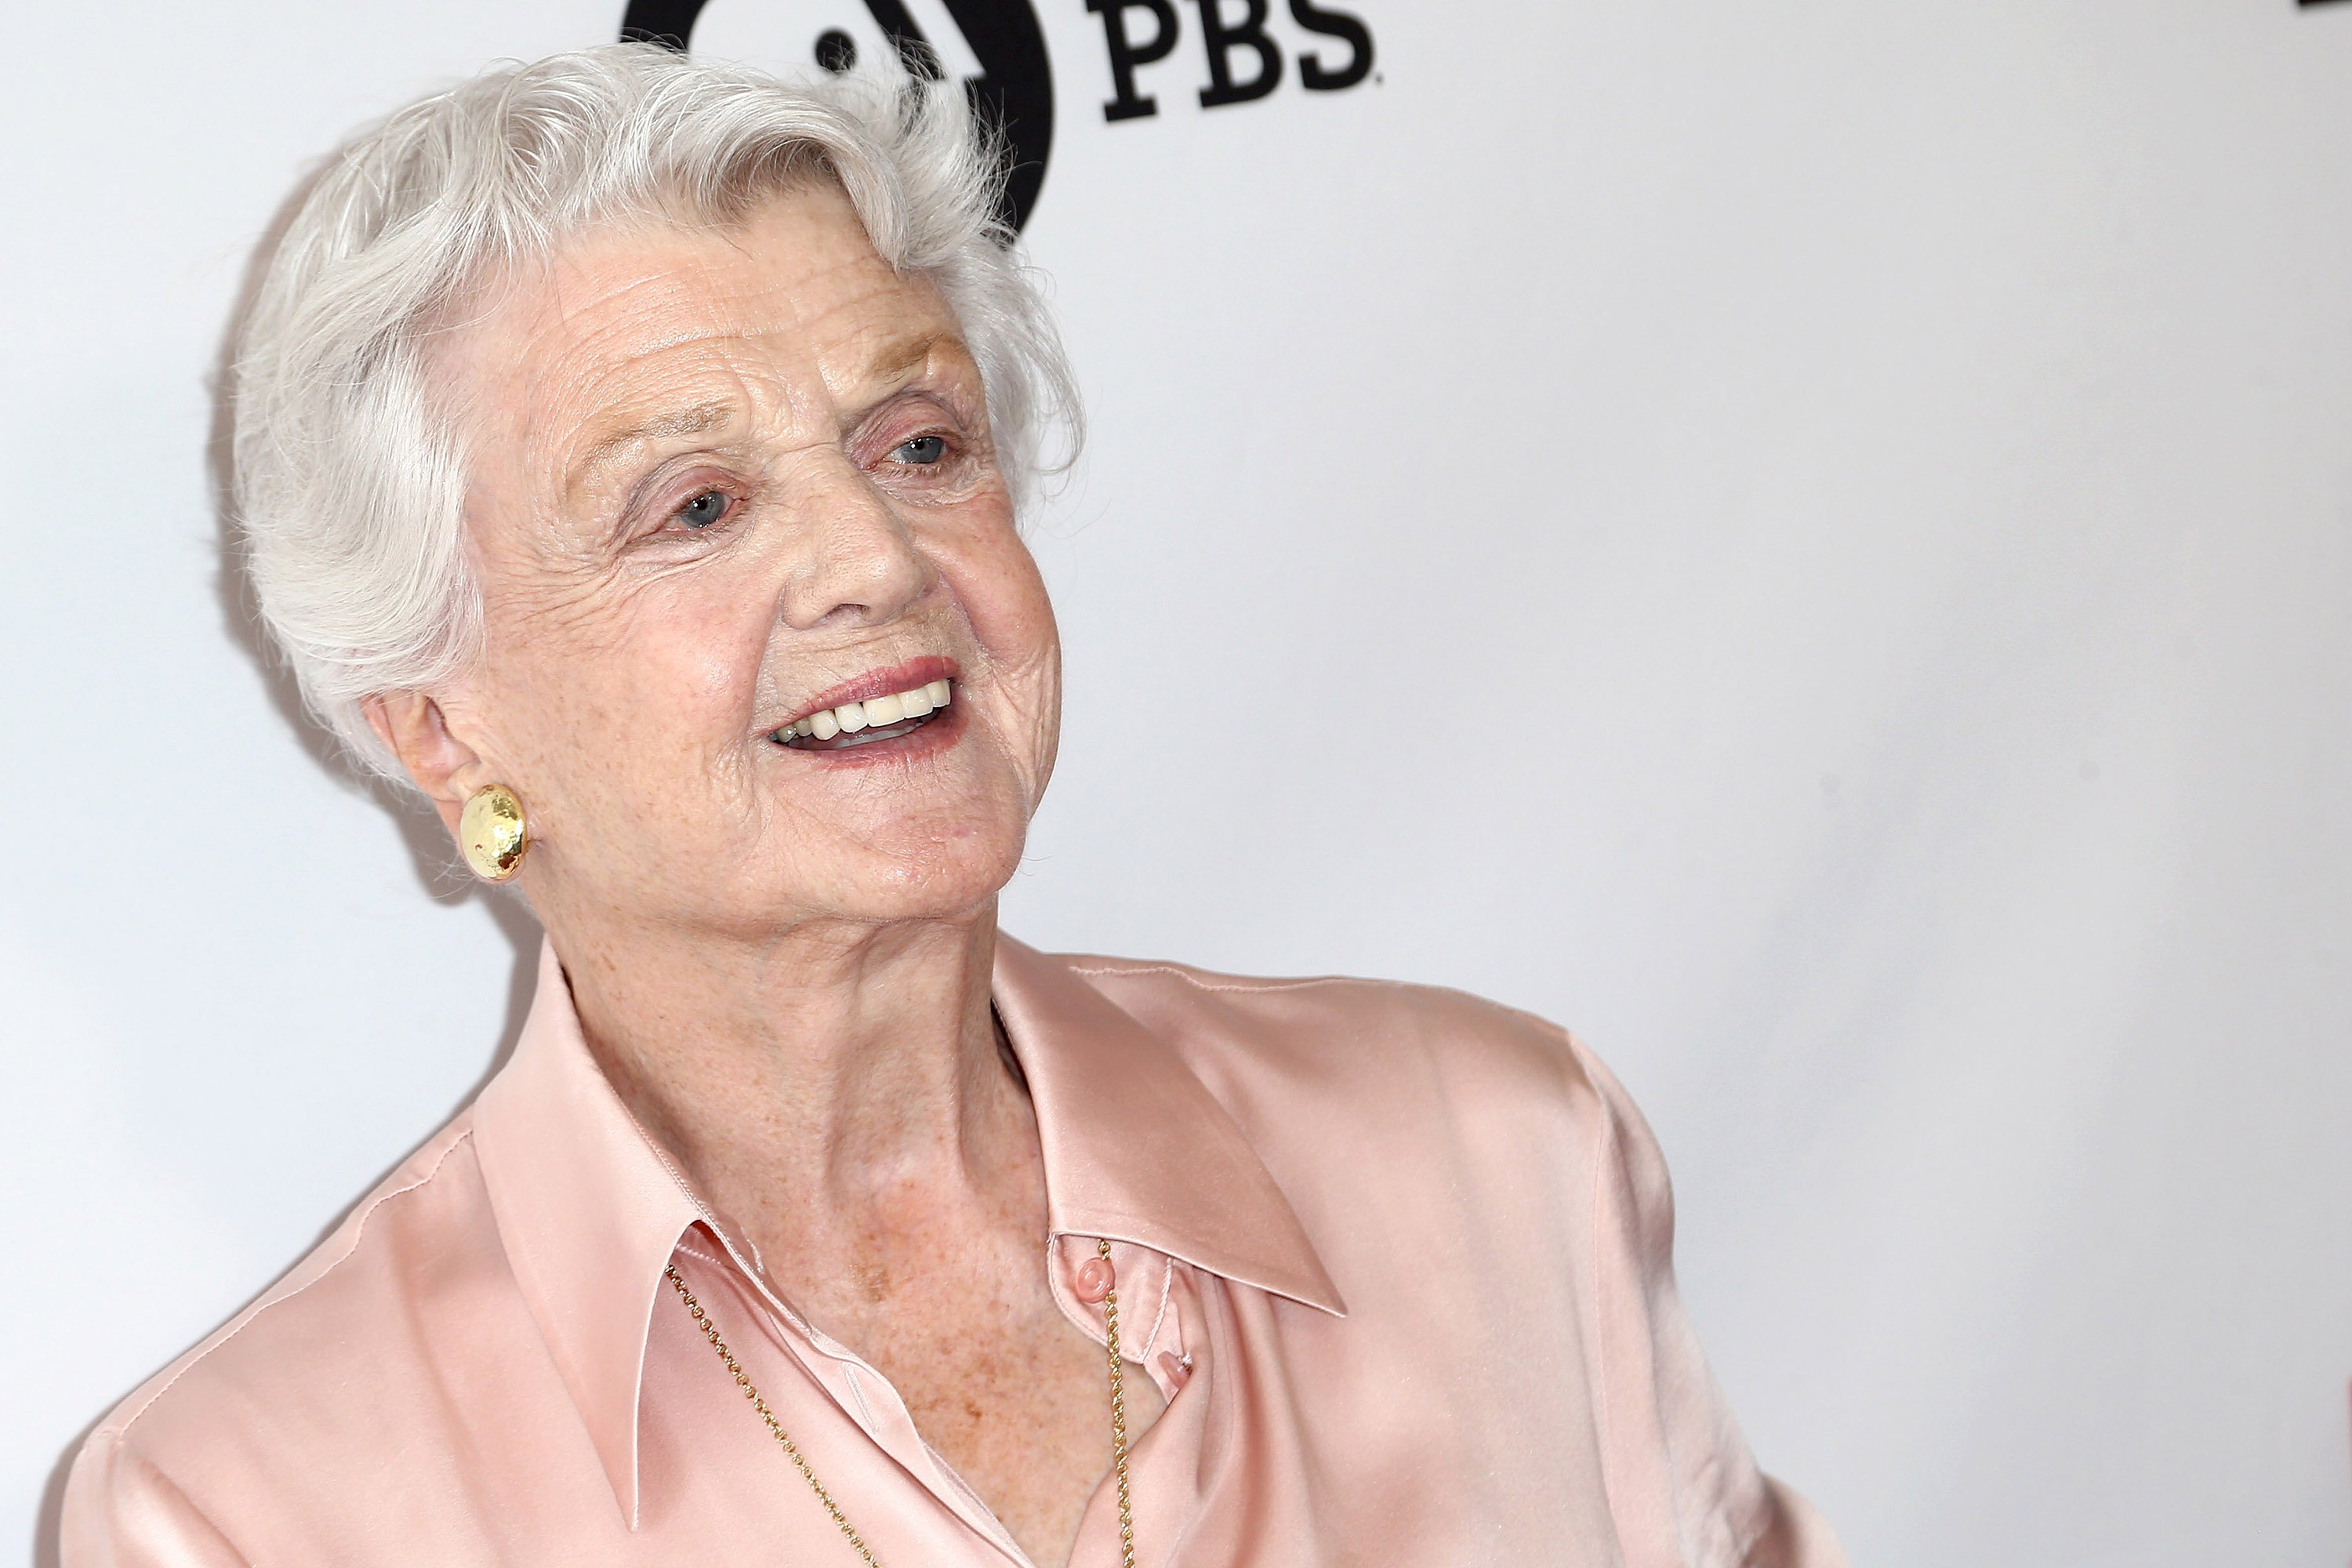  Angela Lansbury attends the "Little Women" FYC Reception And Panel Discussion at Linwood Dunn Theater at the Pickford Center for Motion Study on May 5, 2018 in Hollywood, California. | Source: Getty Images